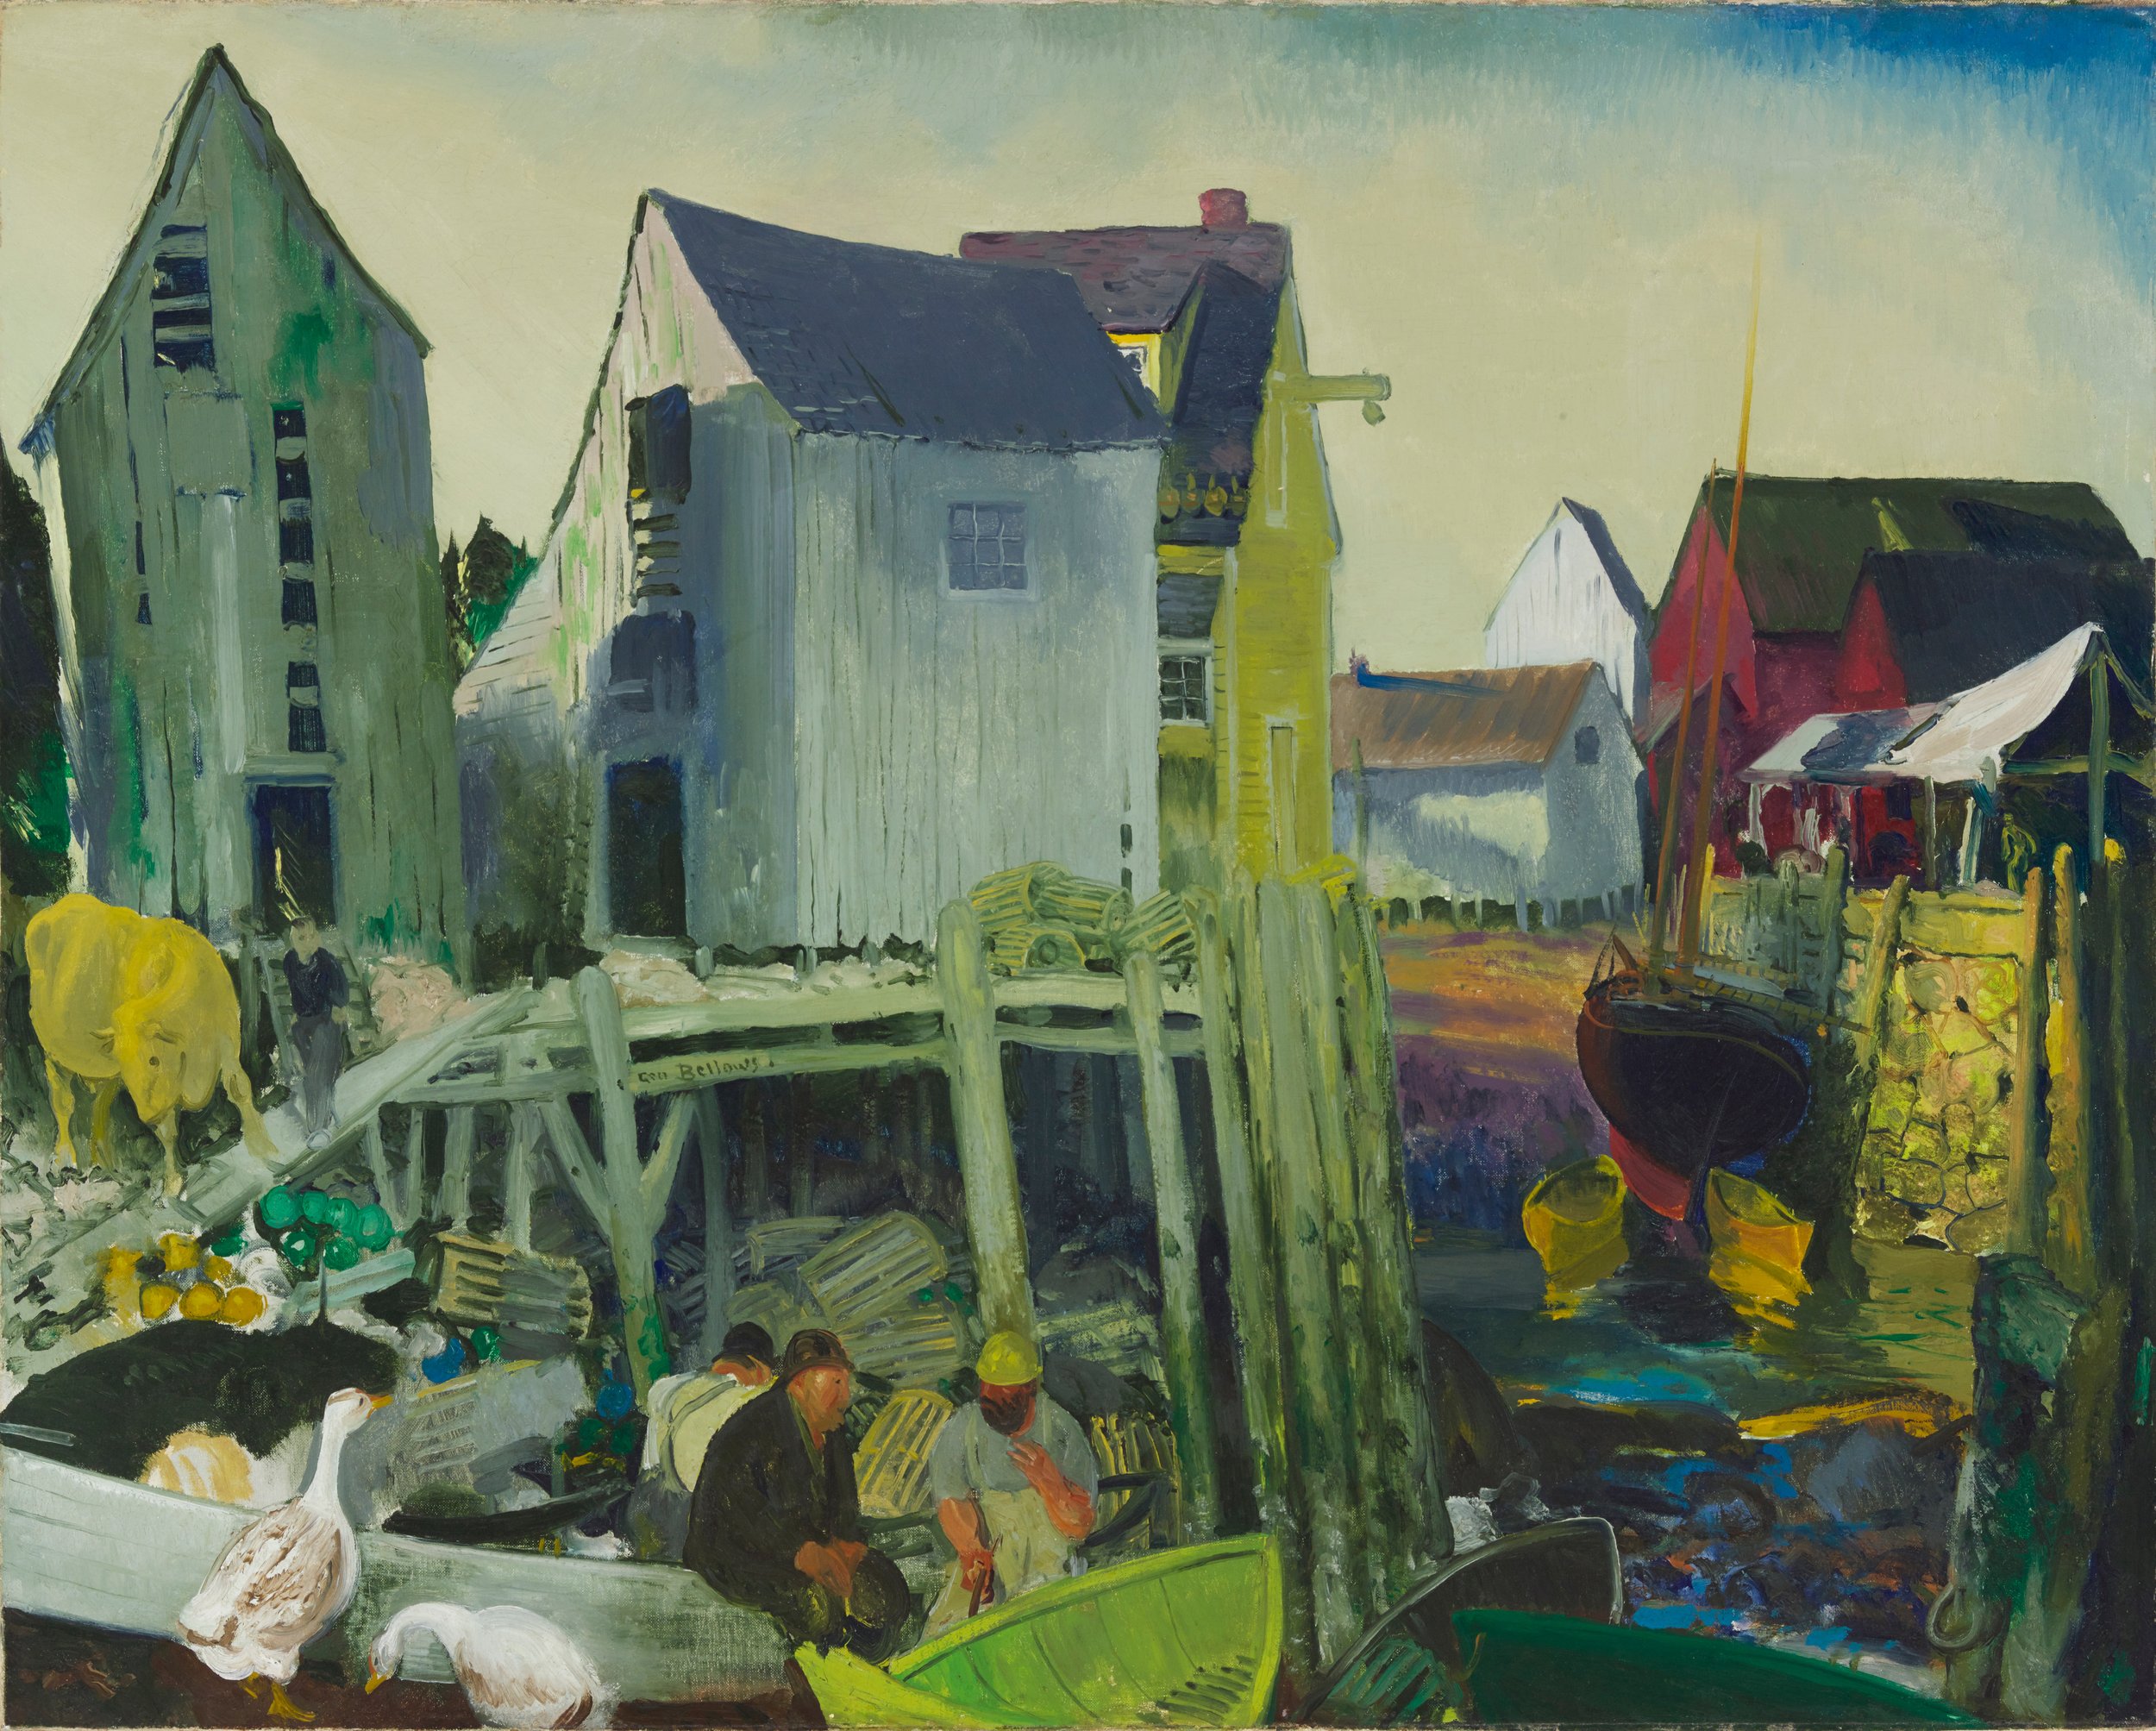   George Wesley Bellows  United States, 1882–1925  Matinicus , 1916 oil on canvas, 32 x 40 inches Bequest of Elizabeth B. Noyce, 1996.38.1 